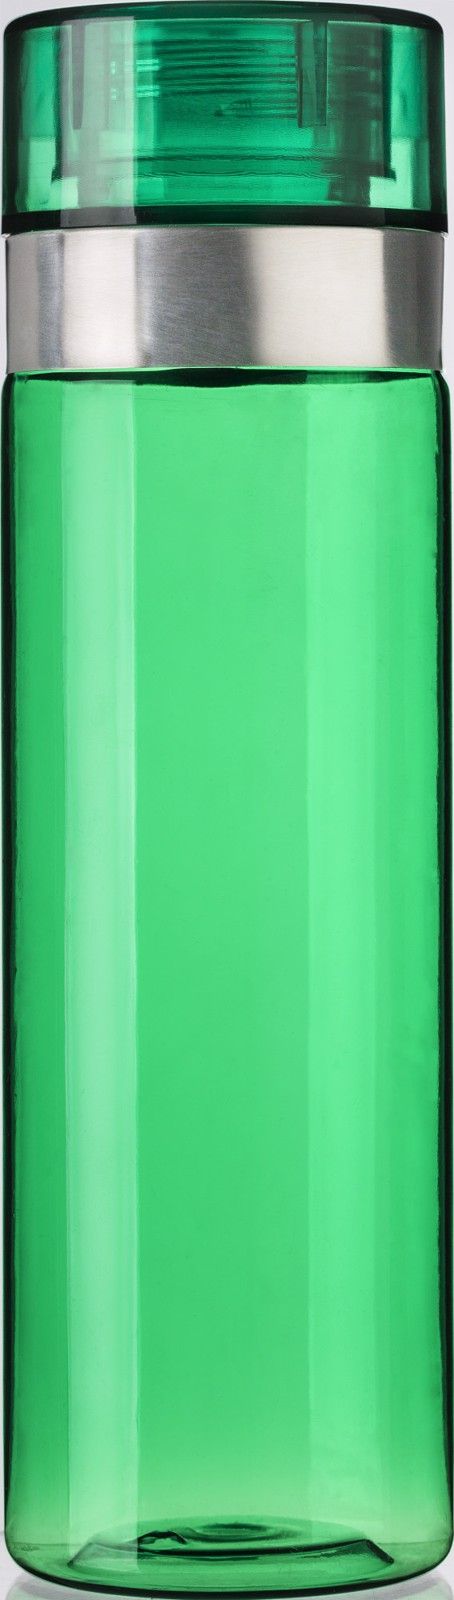 Tritan and PS bottle - Green